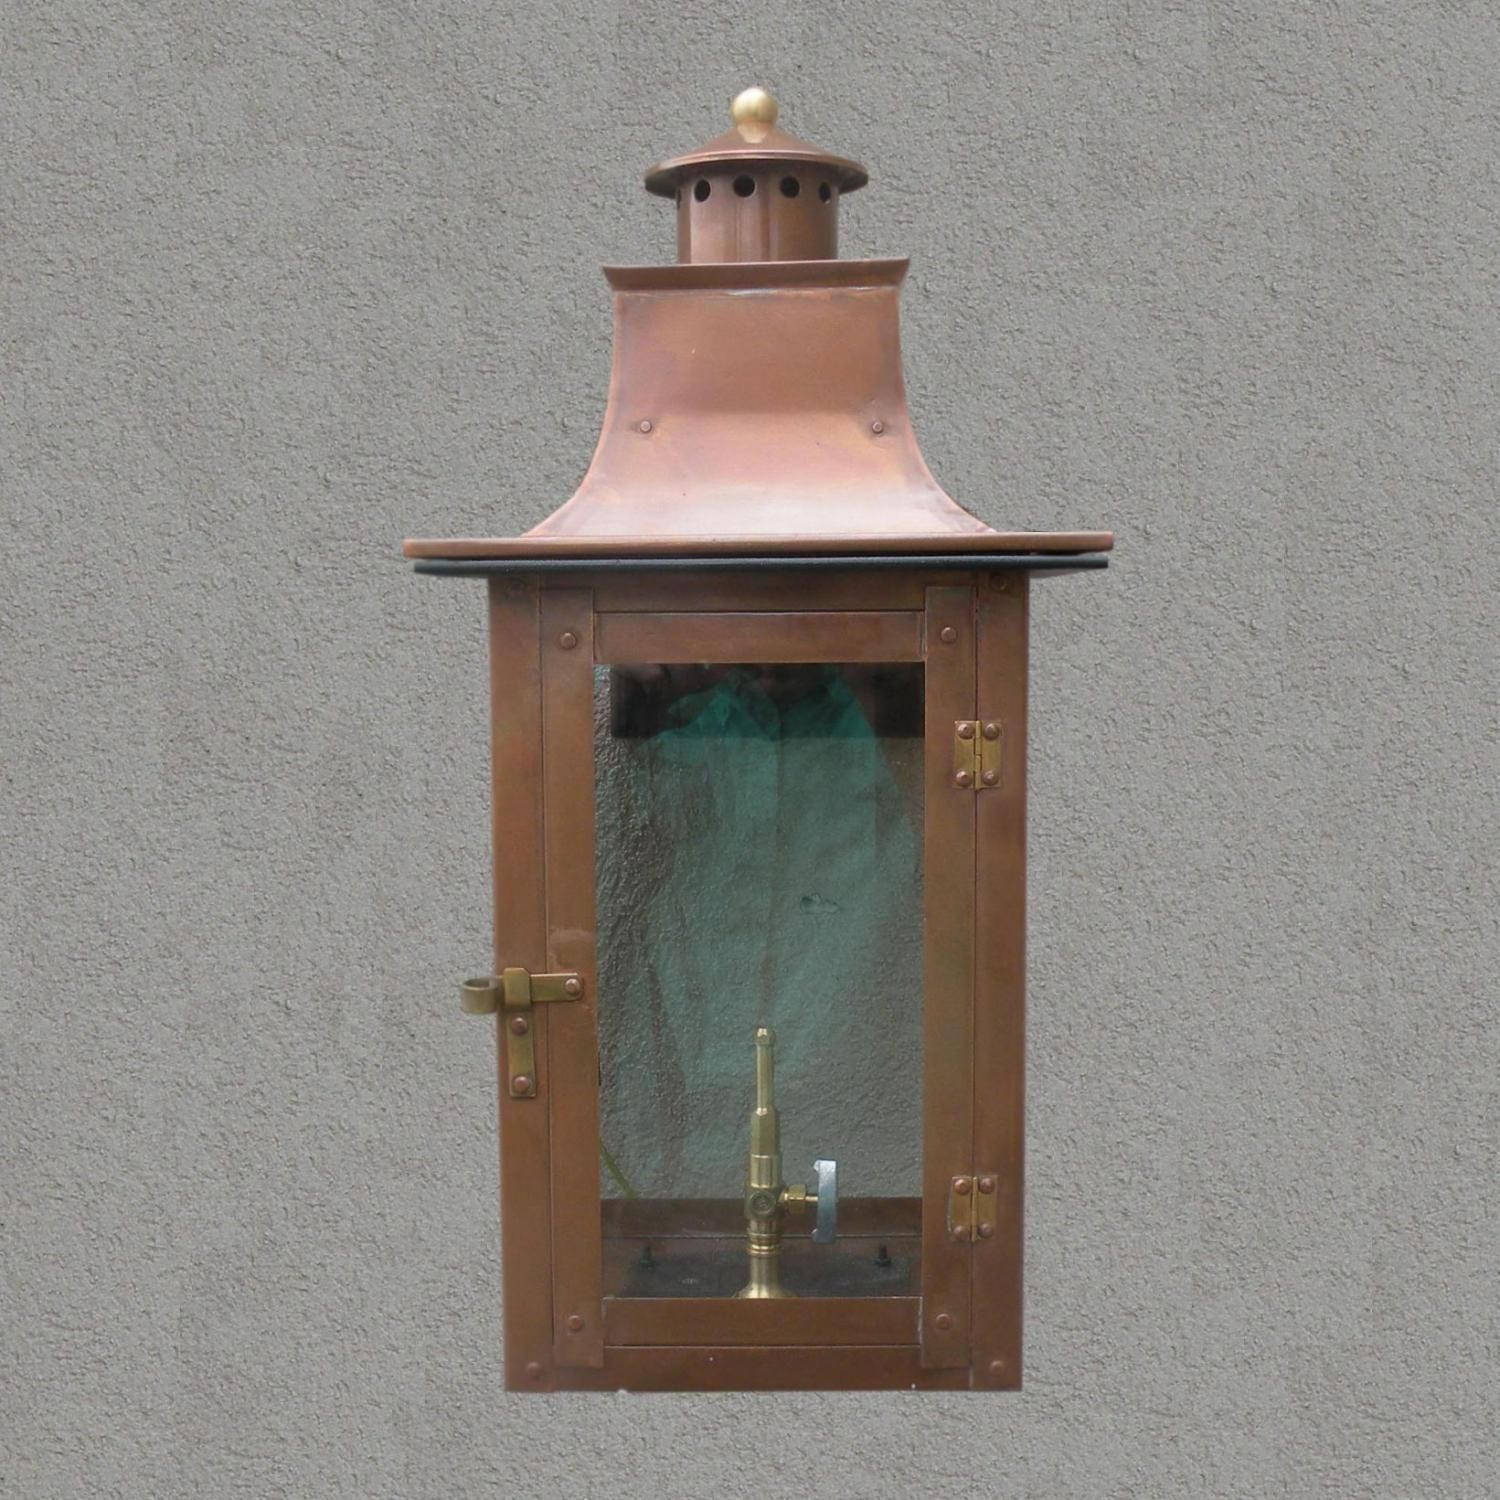 Regency Gl21 Faye Rue Small Natural Gas Light With Open Flame Burner With Regard To Outdoor Wall Mount Gas Lights (View 3 of 15)